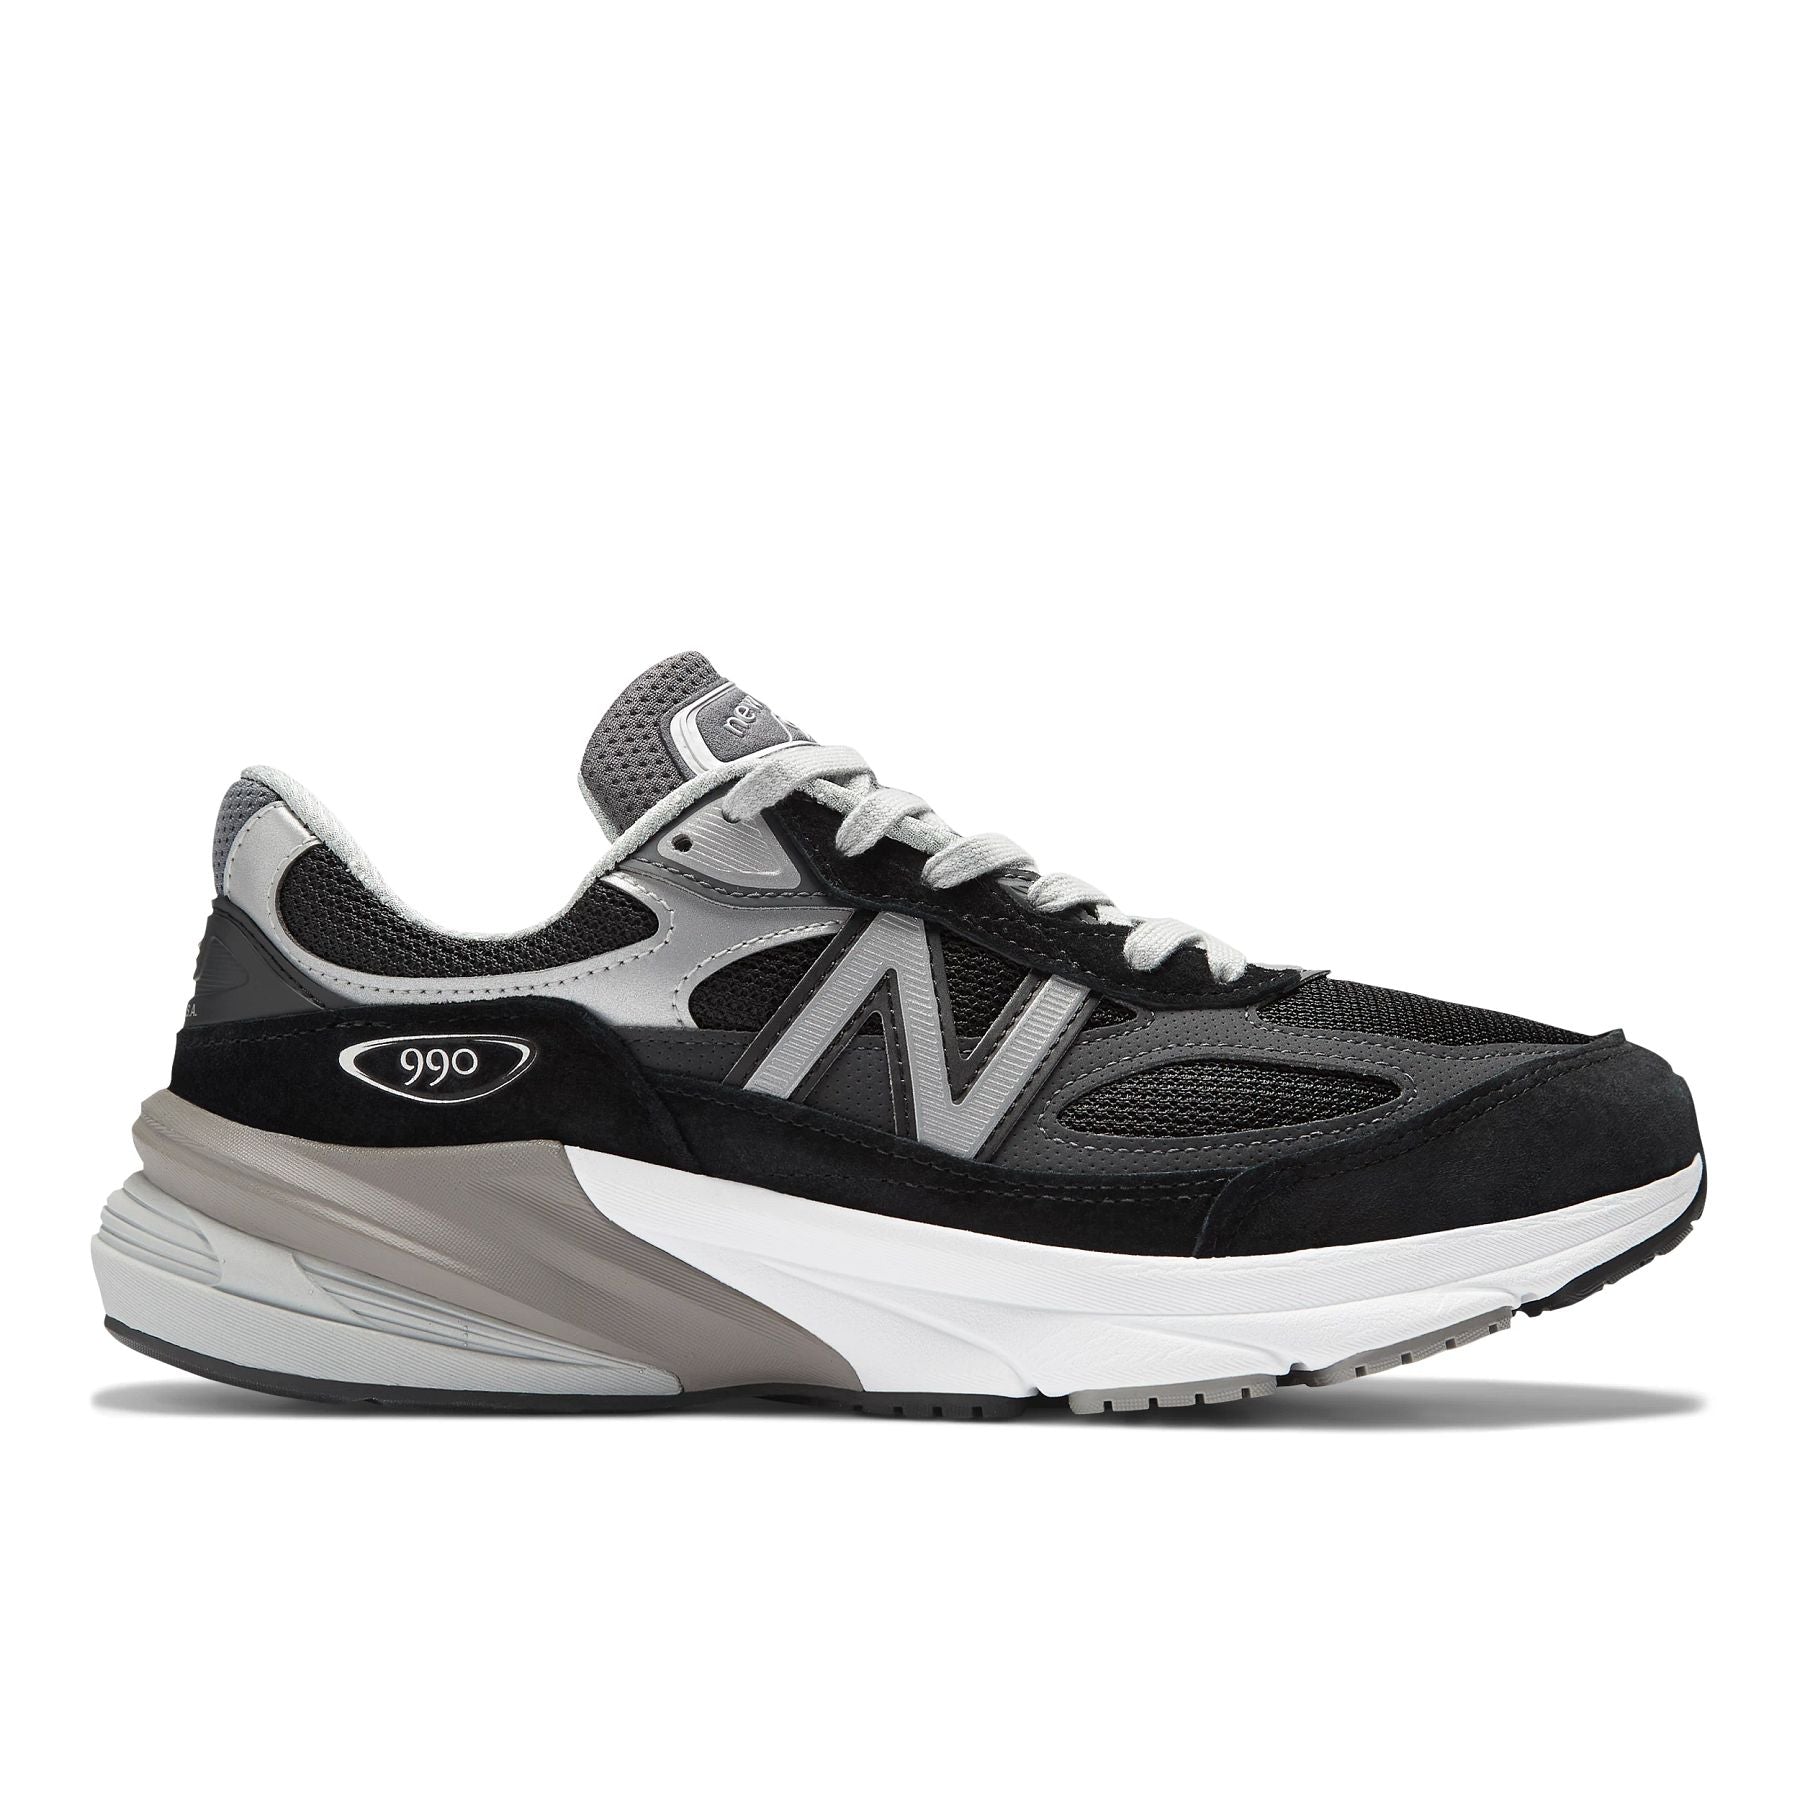 Lateral view of the Men's New Balance 990 V6 lifestyle shoe in Black/White